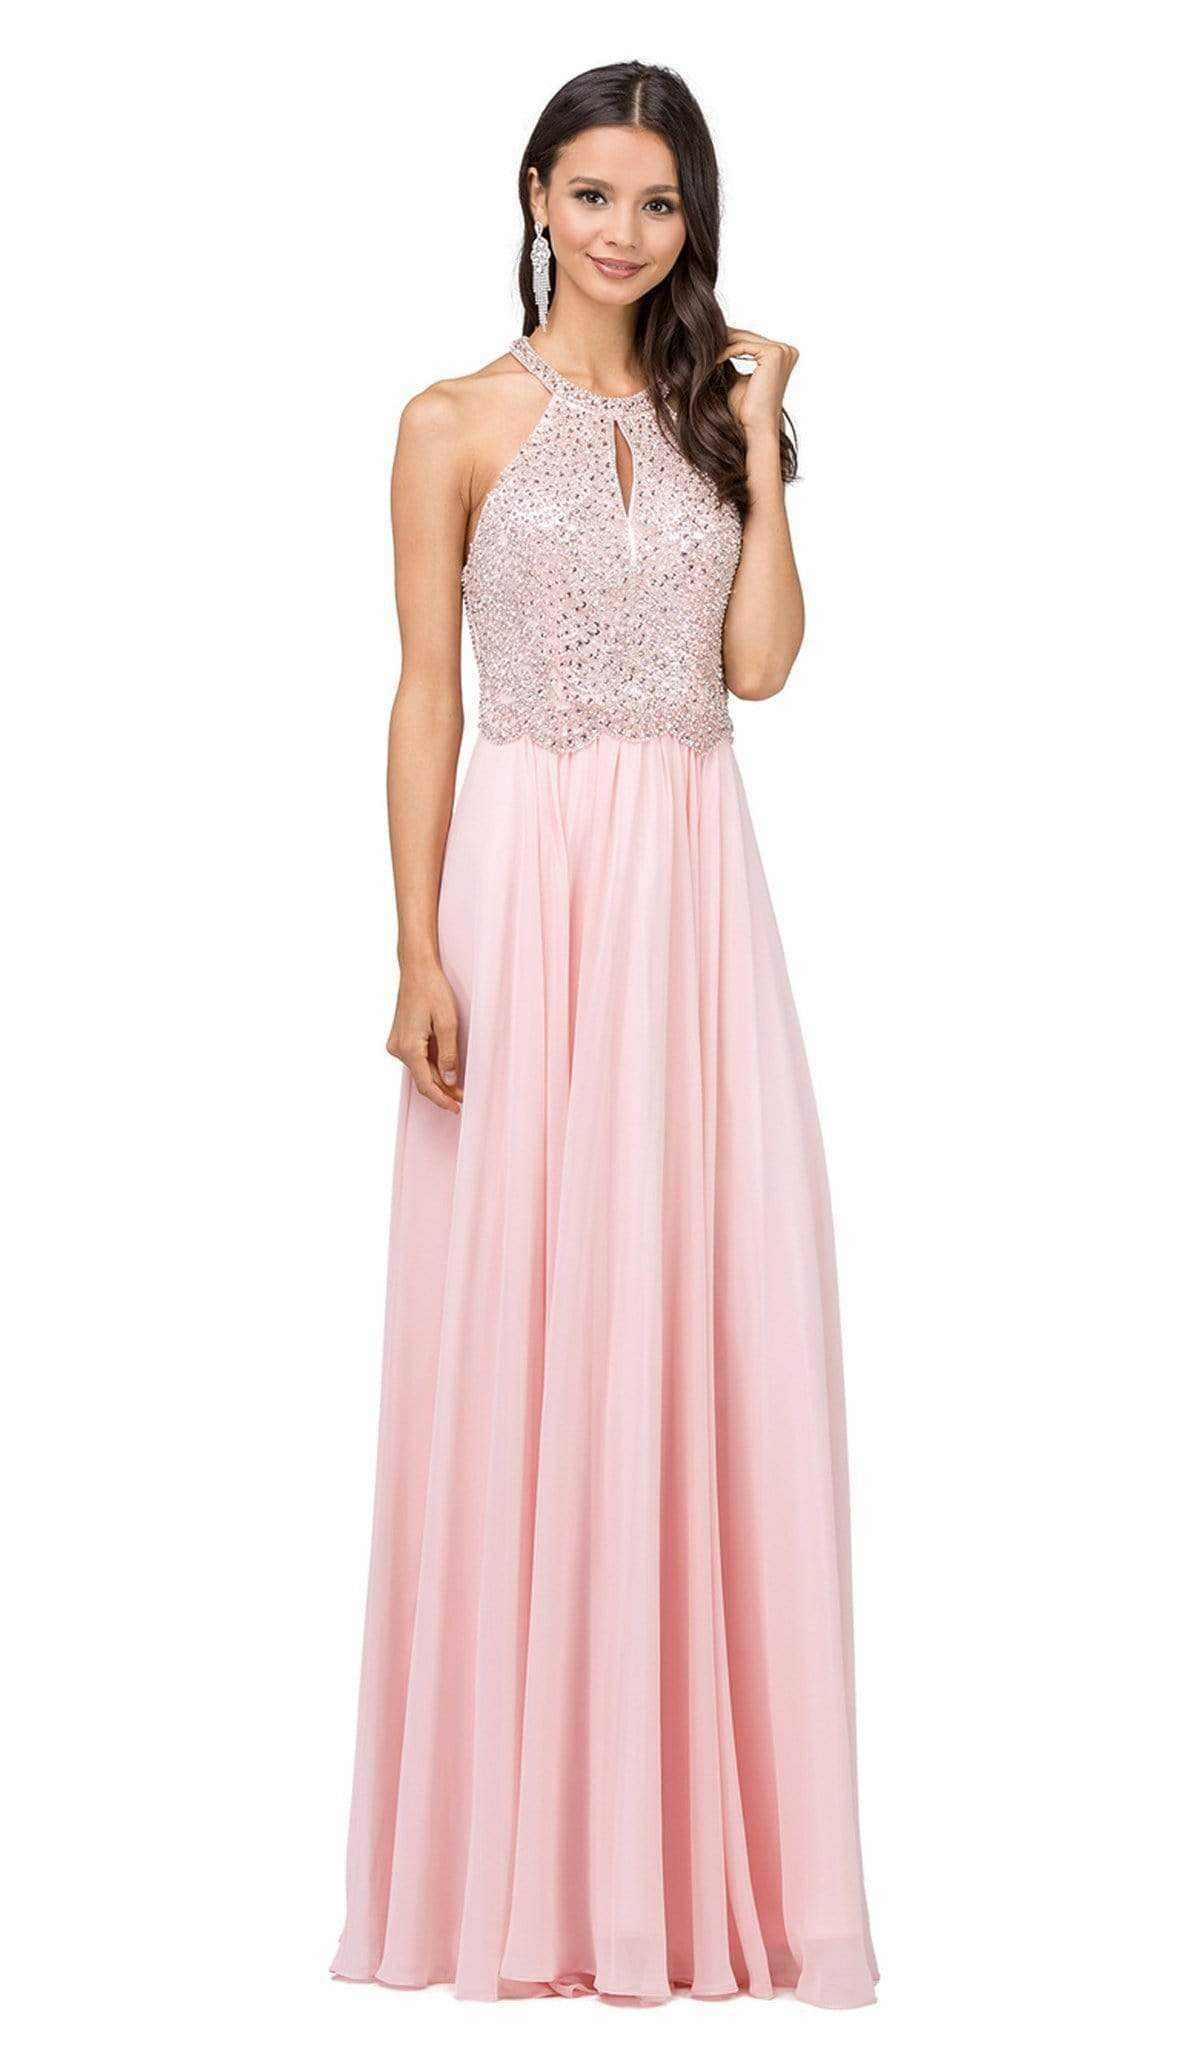 Dancing Queen, Dancing Queen - Bead Embellished Halter Evening Dress 2402 - 1 pc Blush In Size M Available